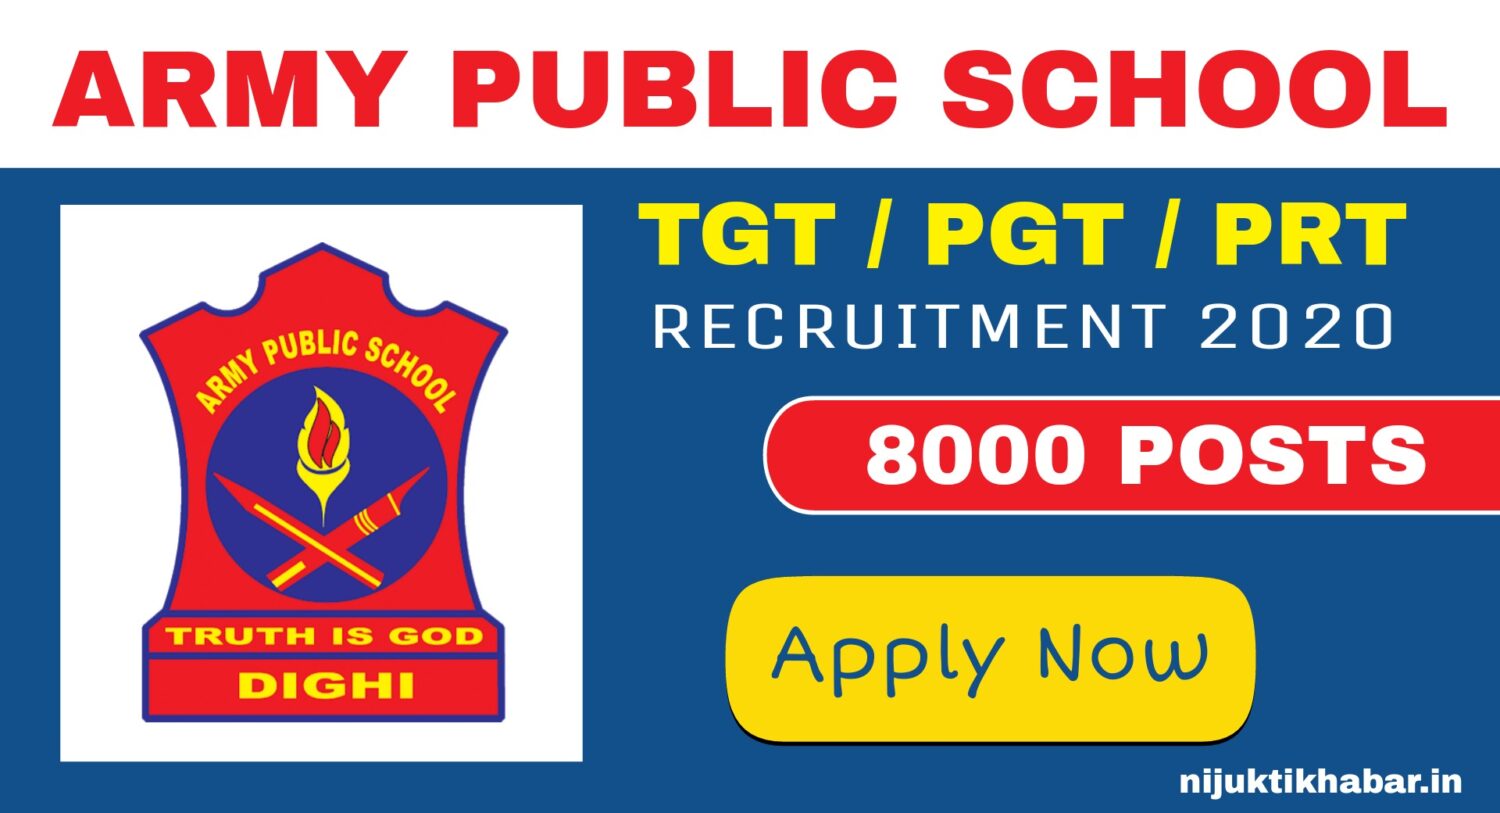 Army Public School Recruitment 2020 – Apply for 8000 PGT / TGT / PRT Posts